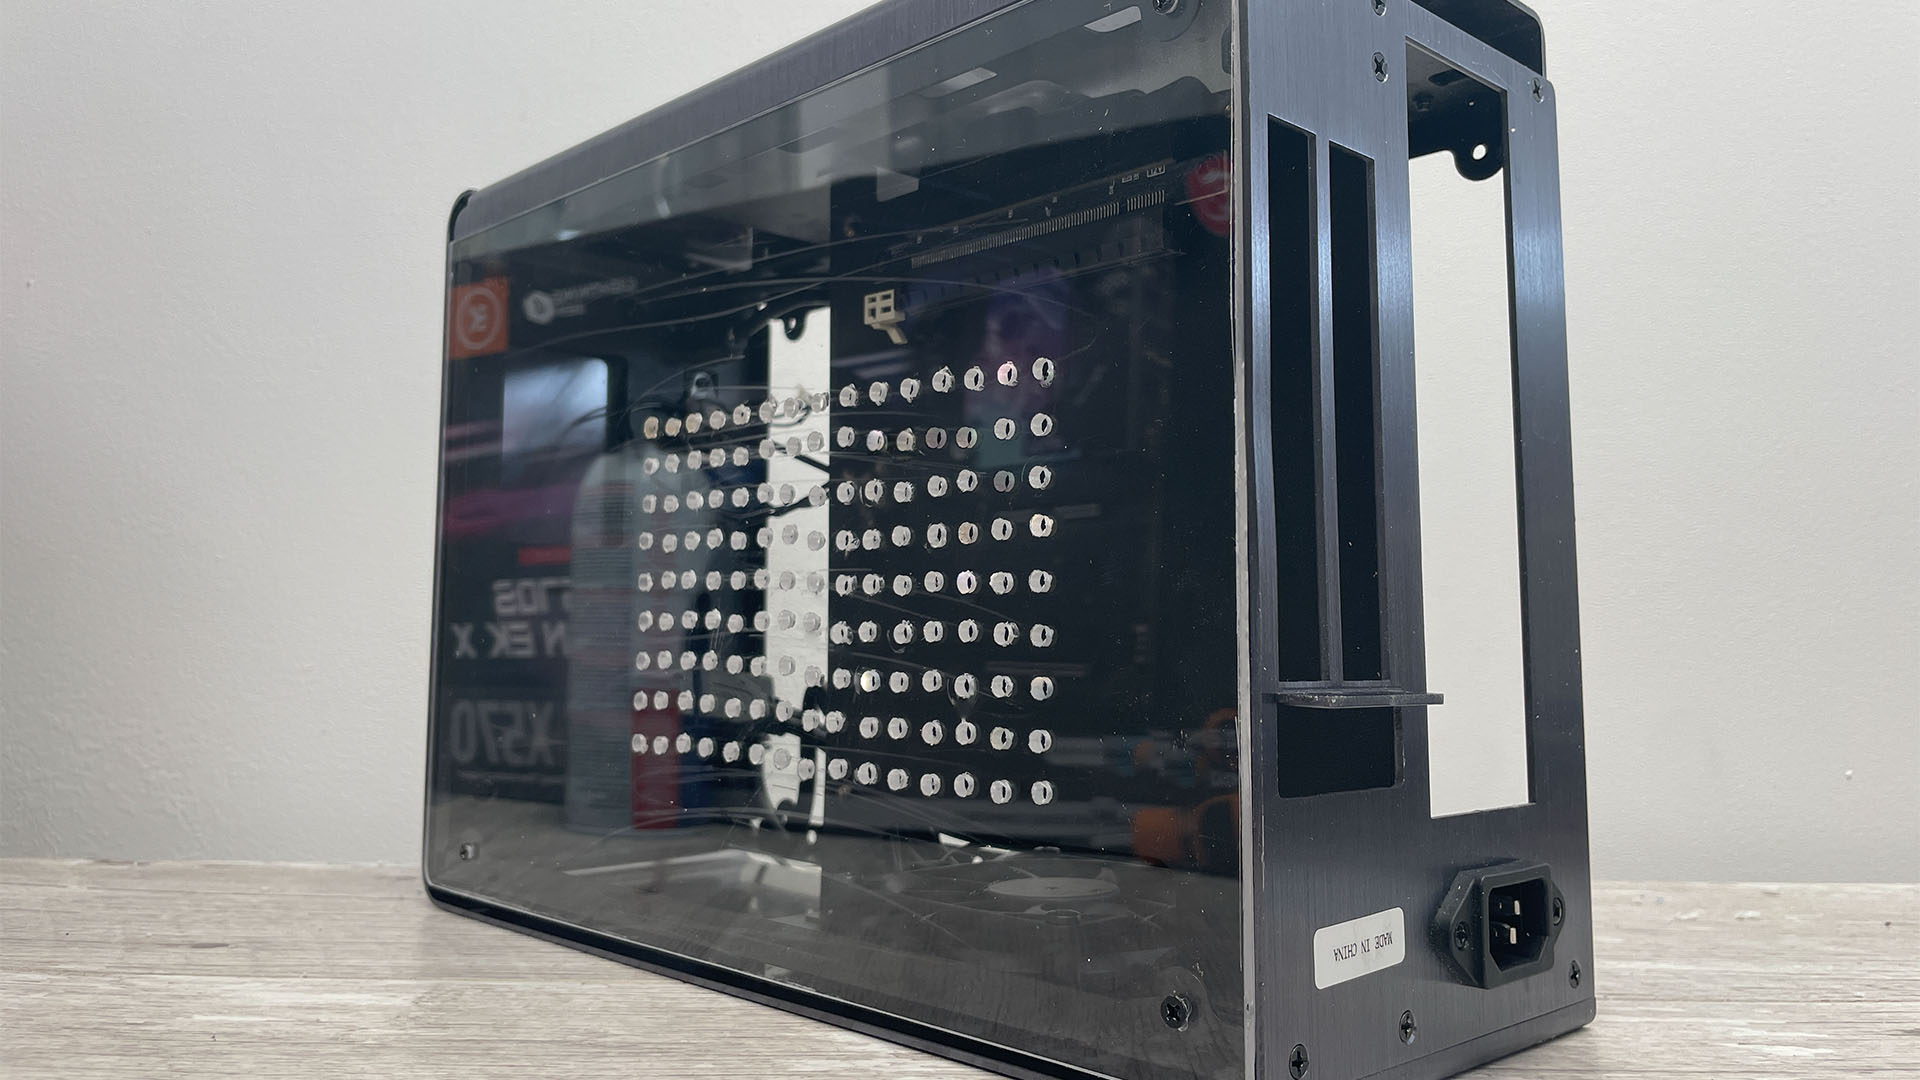 Make vented acrylic window panel for PC case